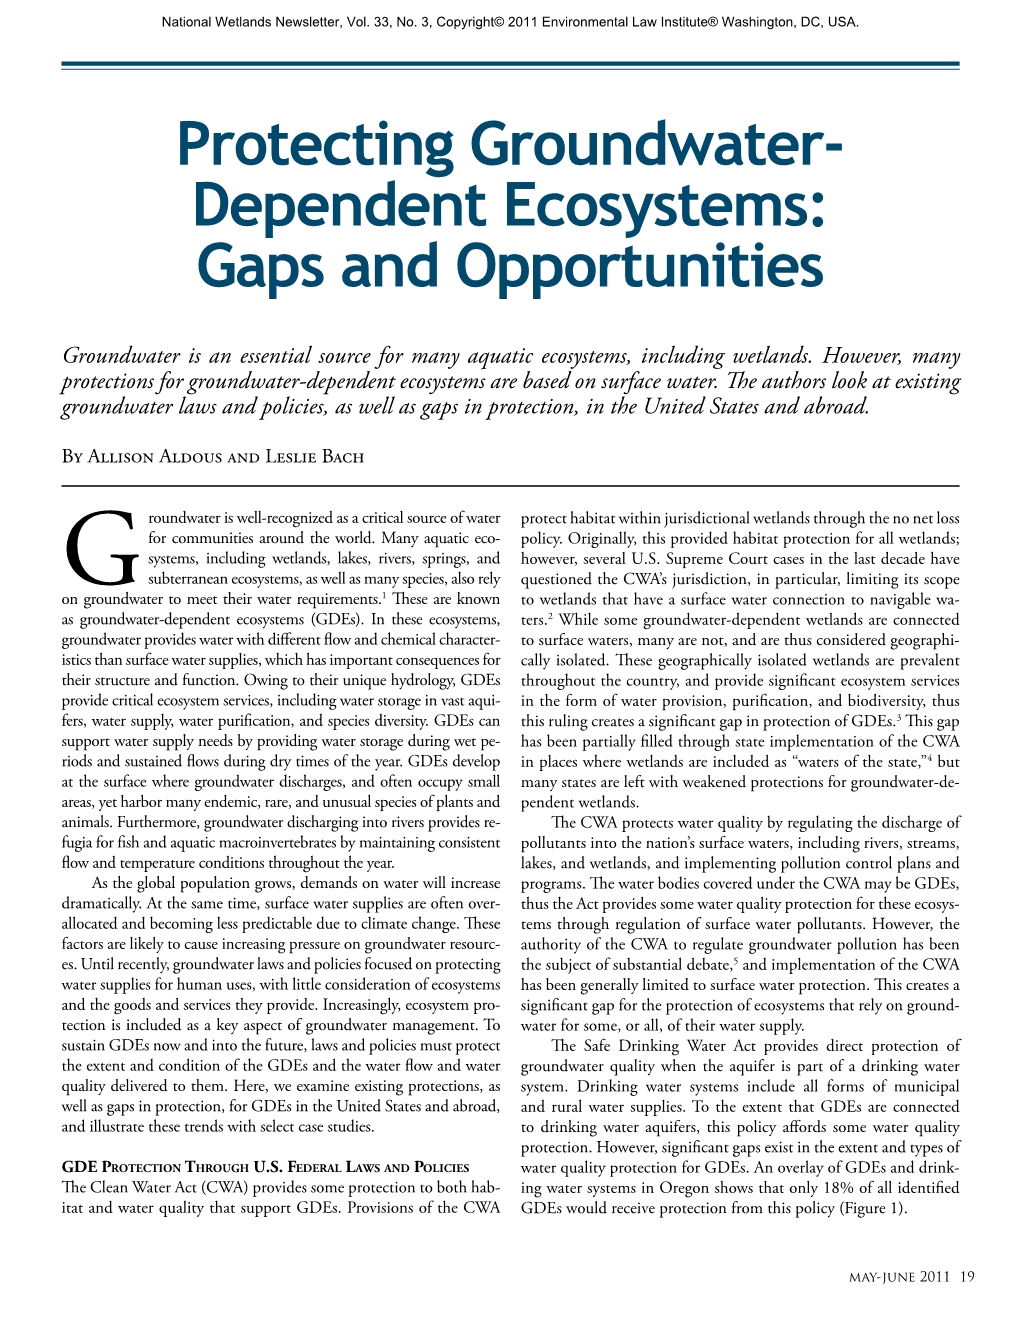 Protecting Groundwater- Dependent Ecosystems: Gaps and Opportunities